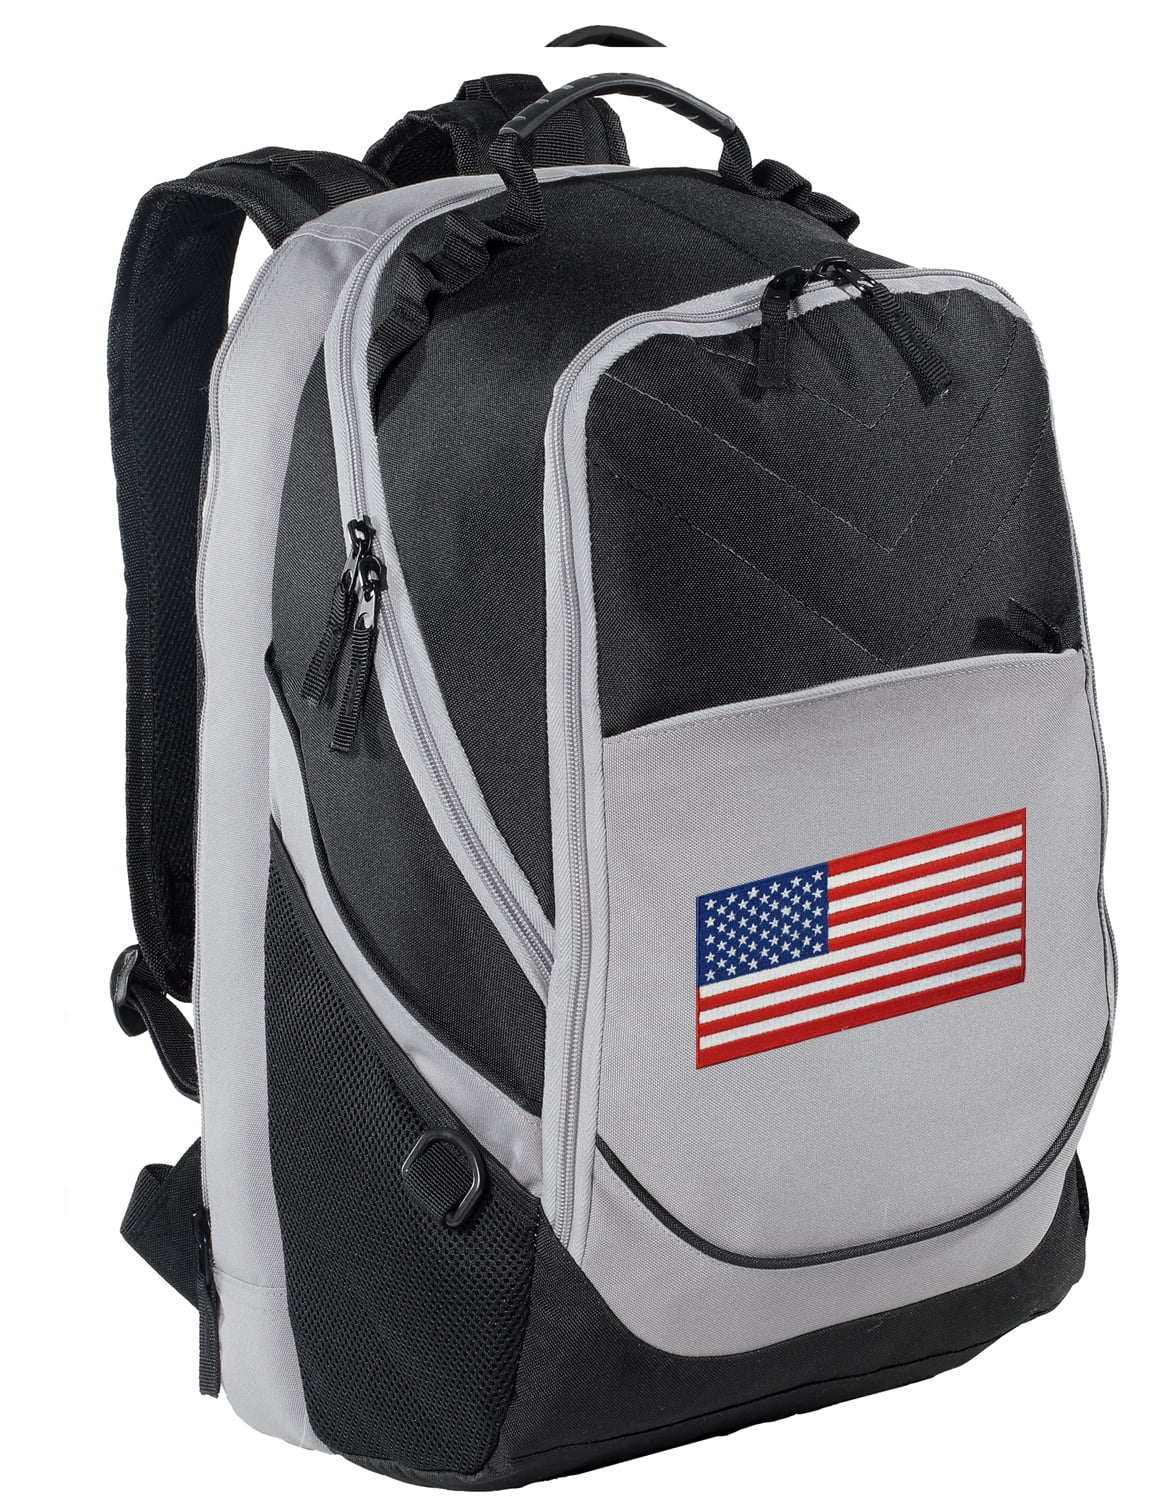 Flying Eagle With USA Flag Laptop Tote Bag Compatible With 13-15.6in Ultrabook Carrying Shoulder Handbag With Strap,